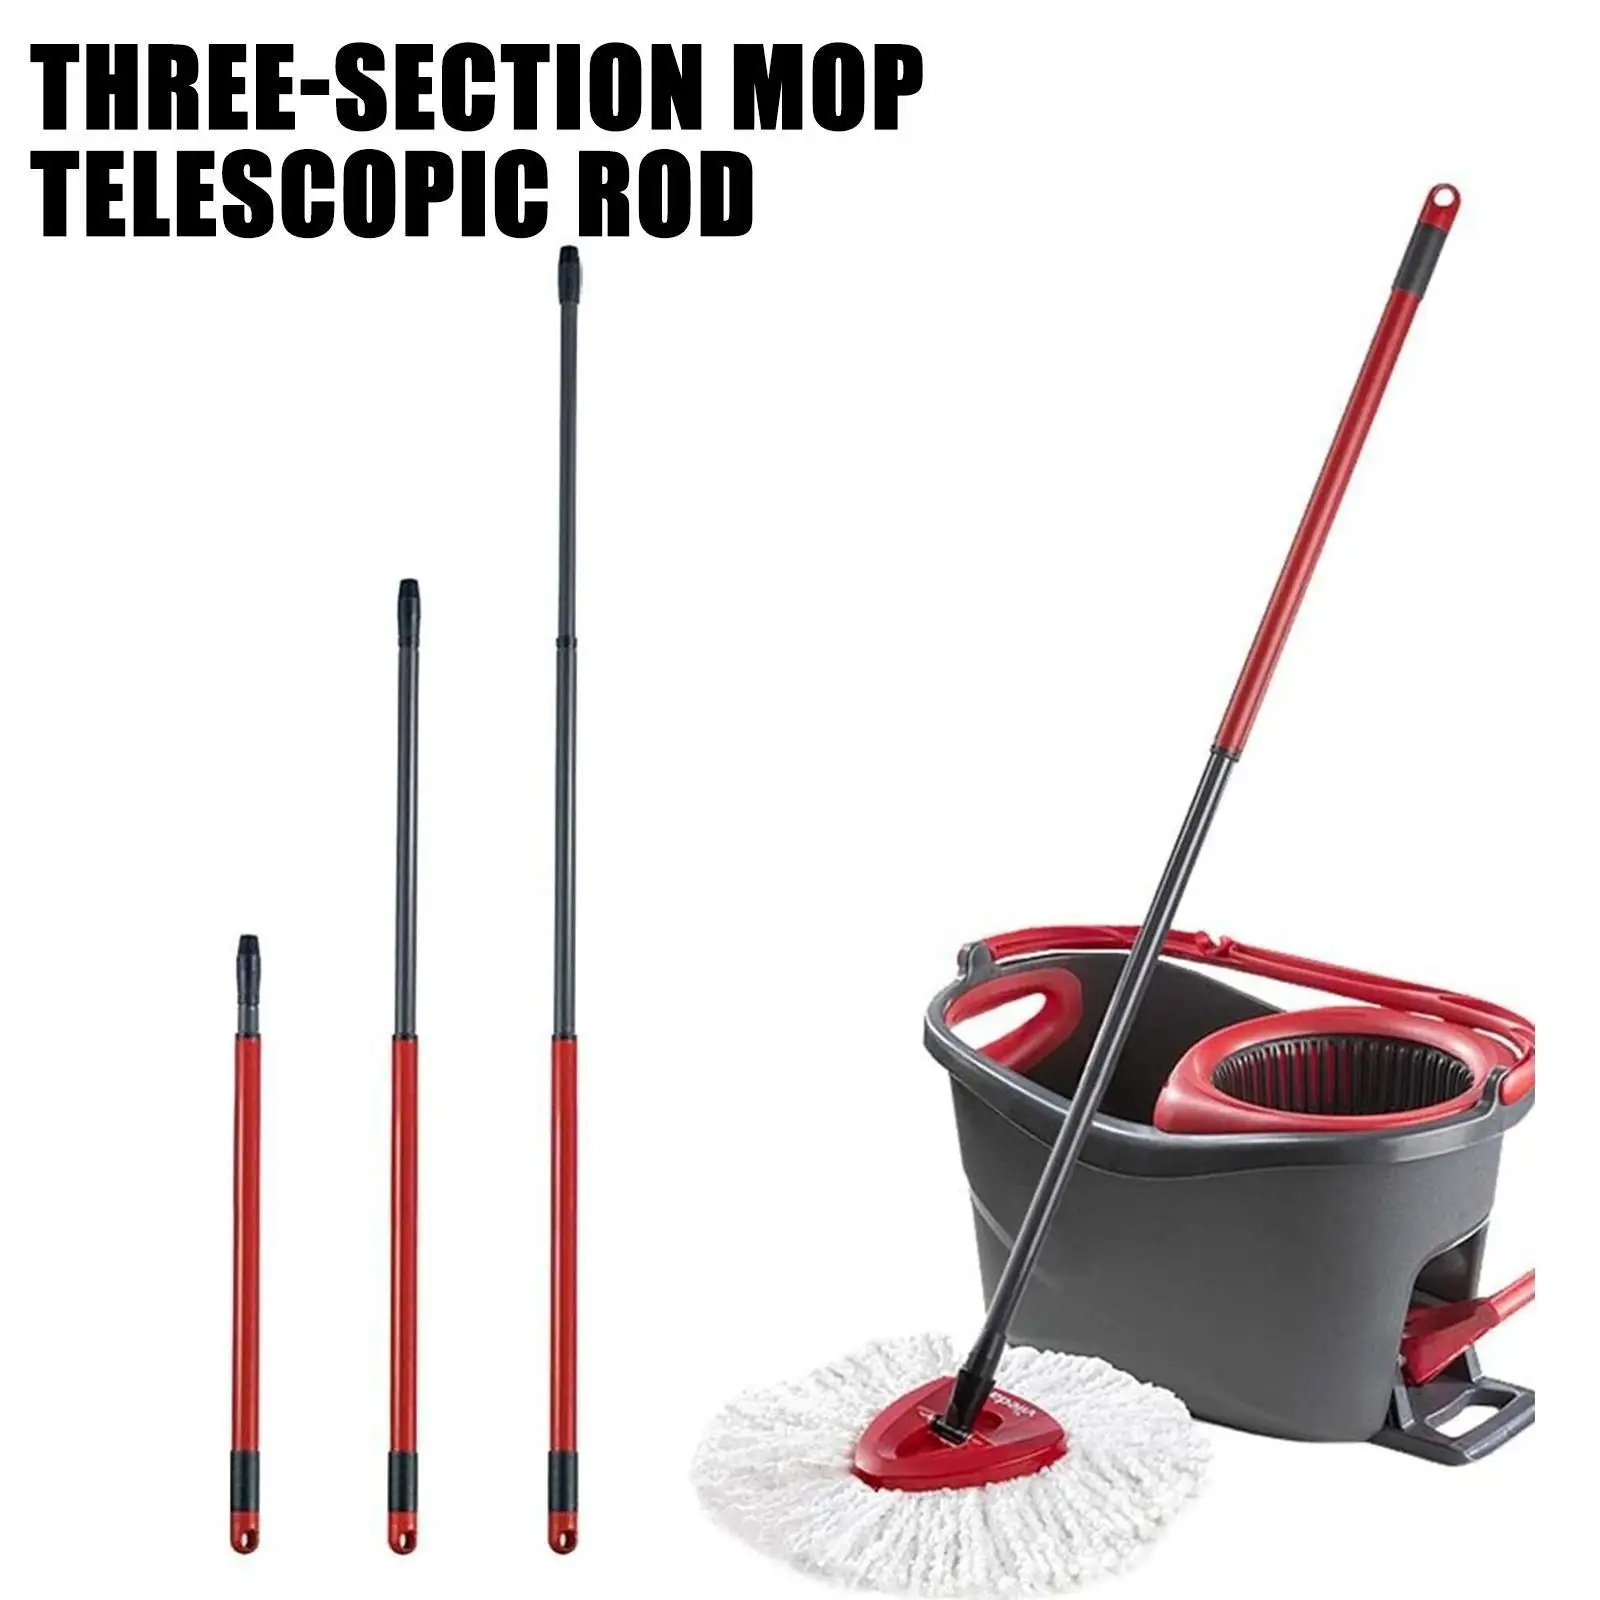 55-122cm Rotary Mop Rod Fit O-cedar/Vileda Three Sections Telescopic Easy Durable Mop Of Rod Install To M7K9